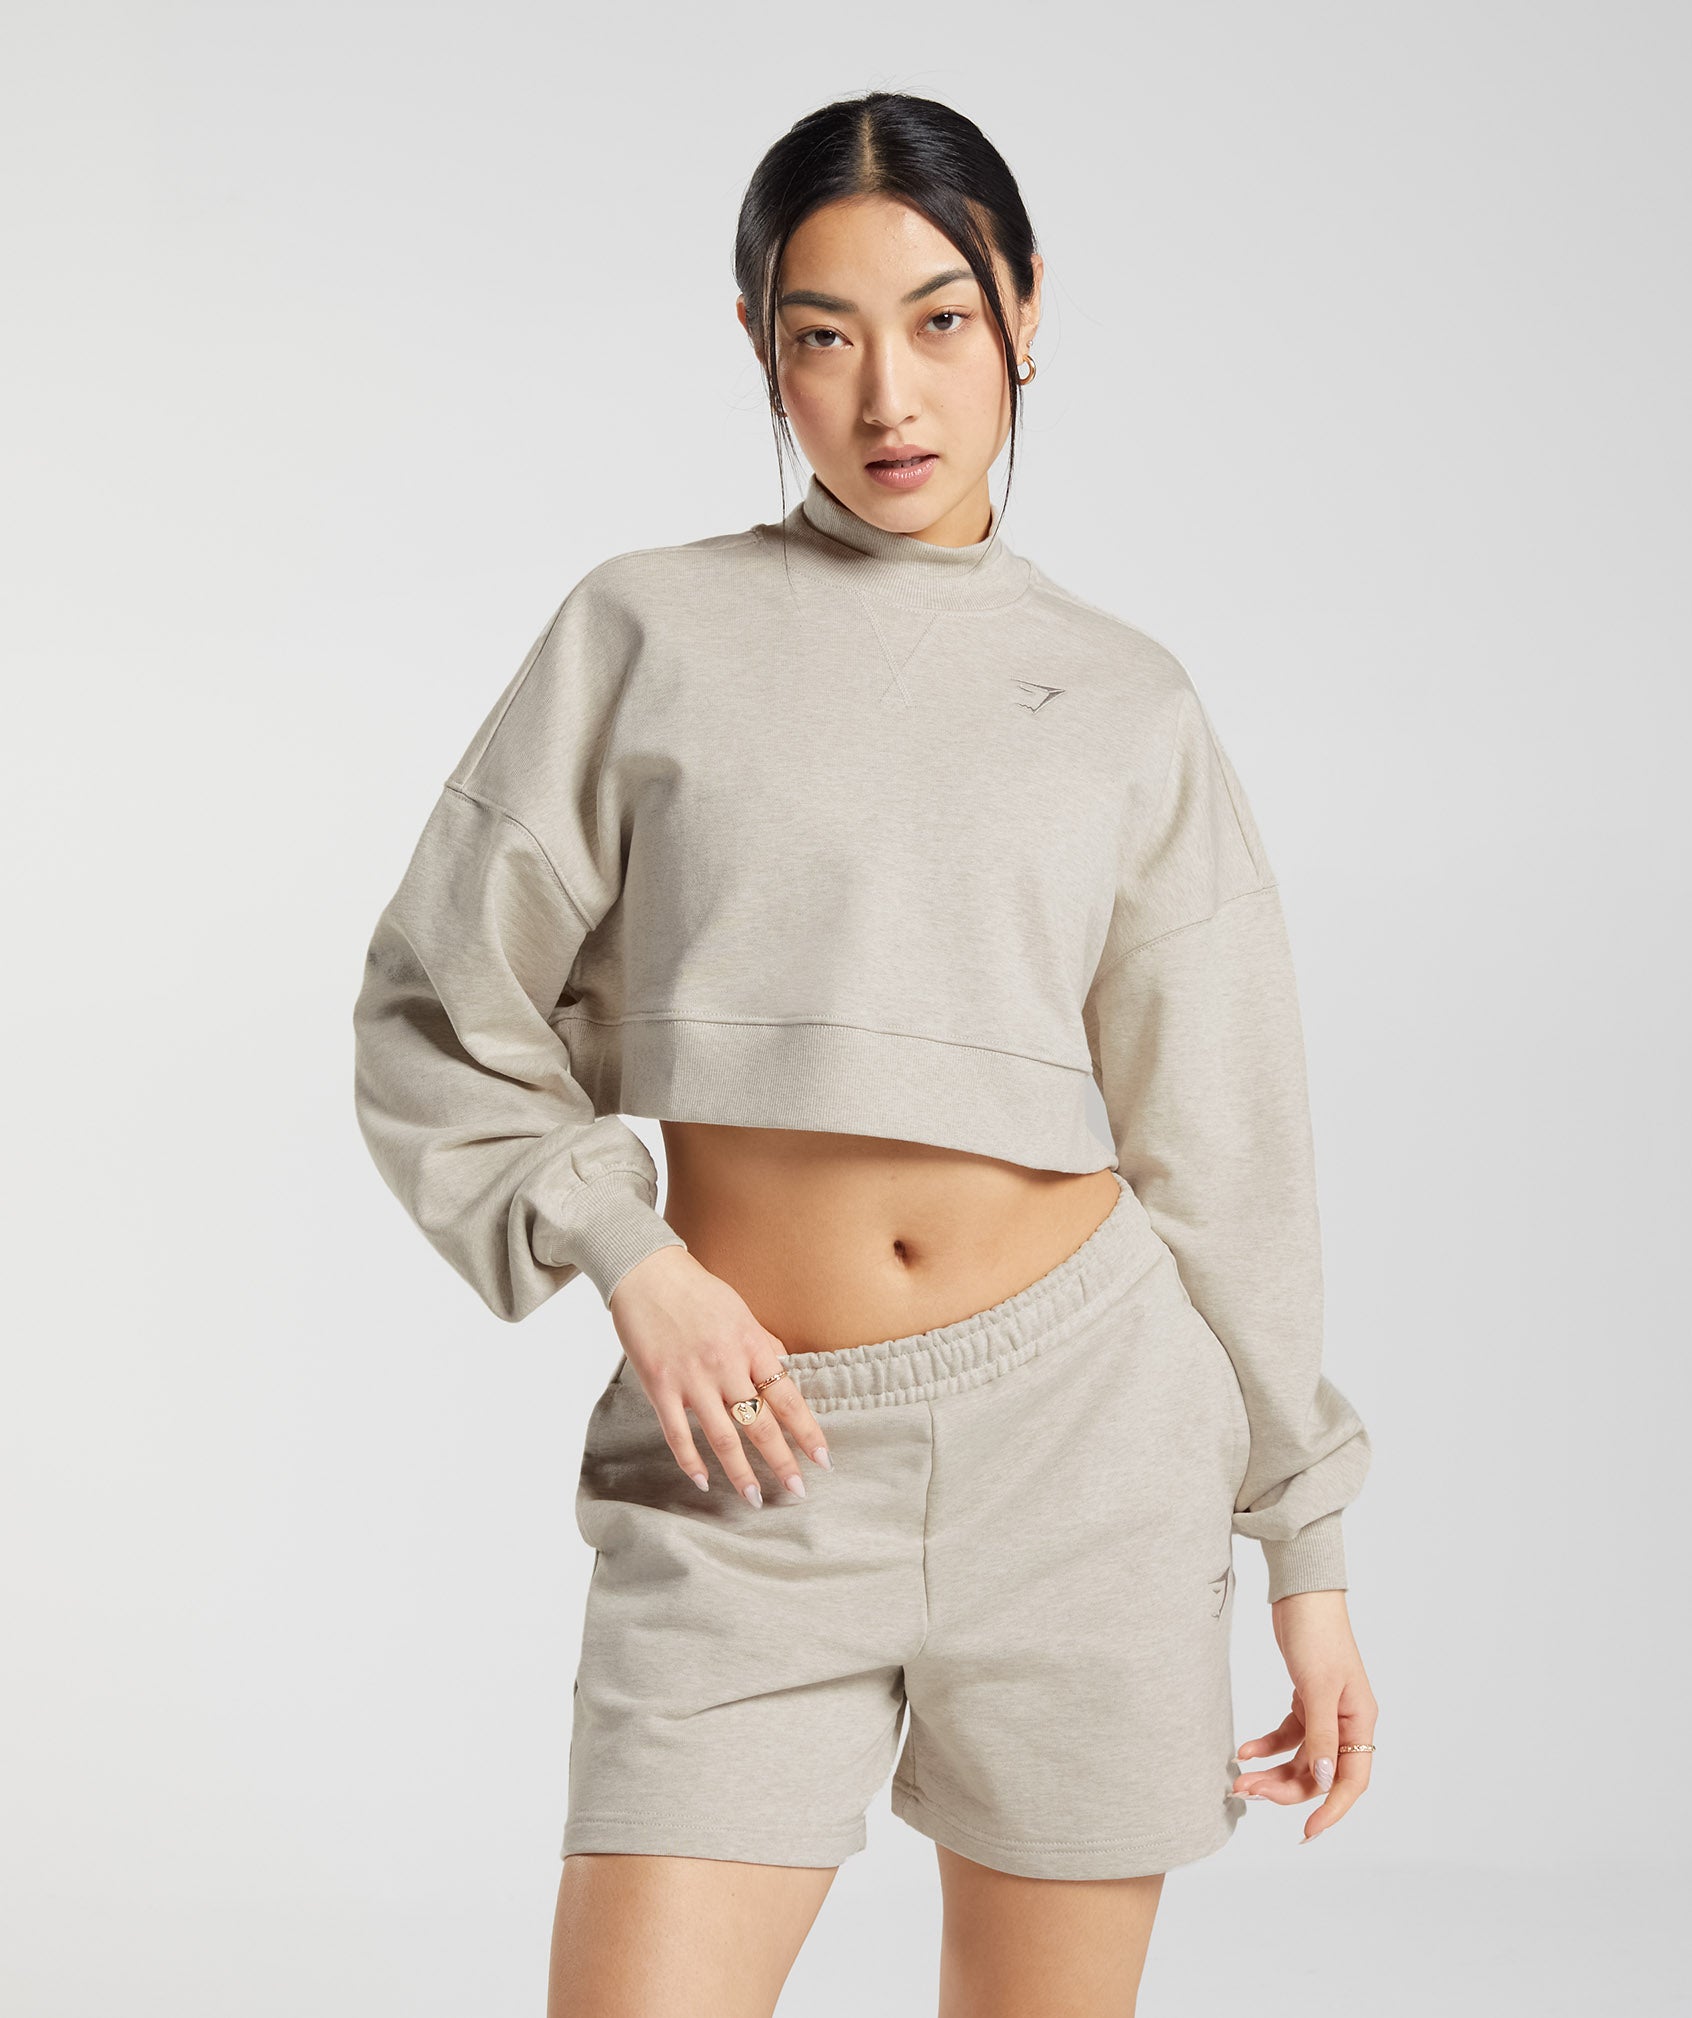 Gymshark Rest Day Sweats Cropped Pullover - Sand Marl | Gymshark